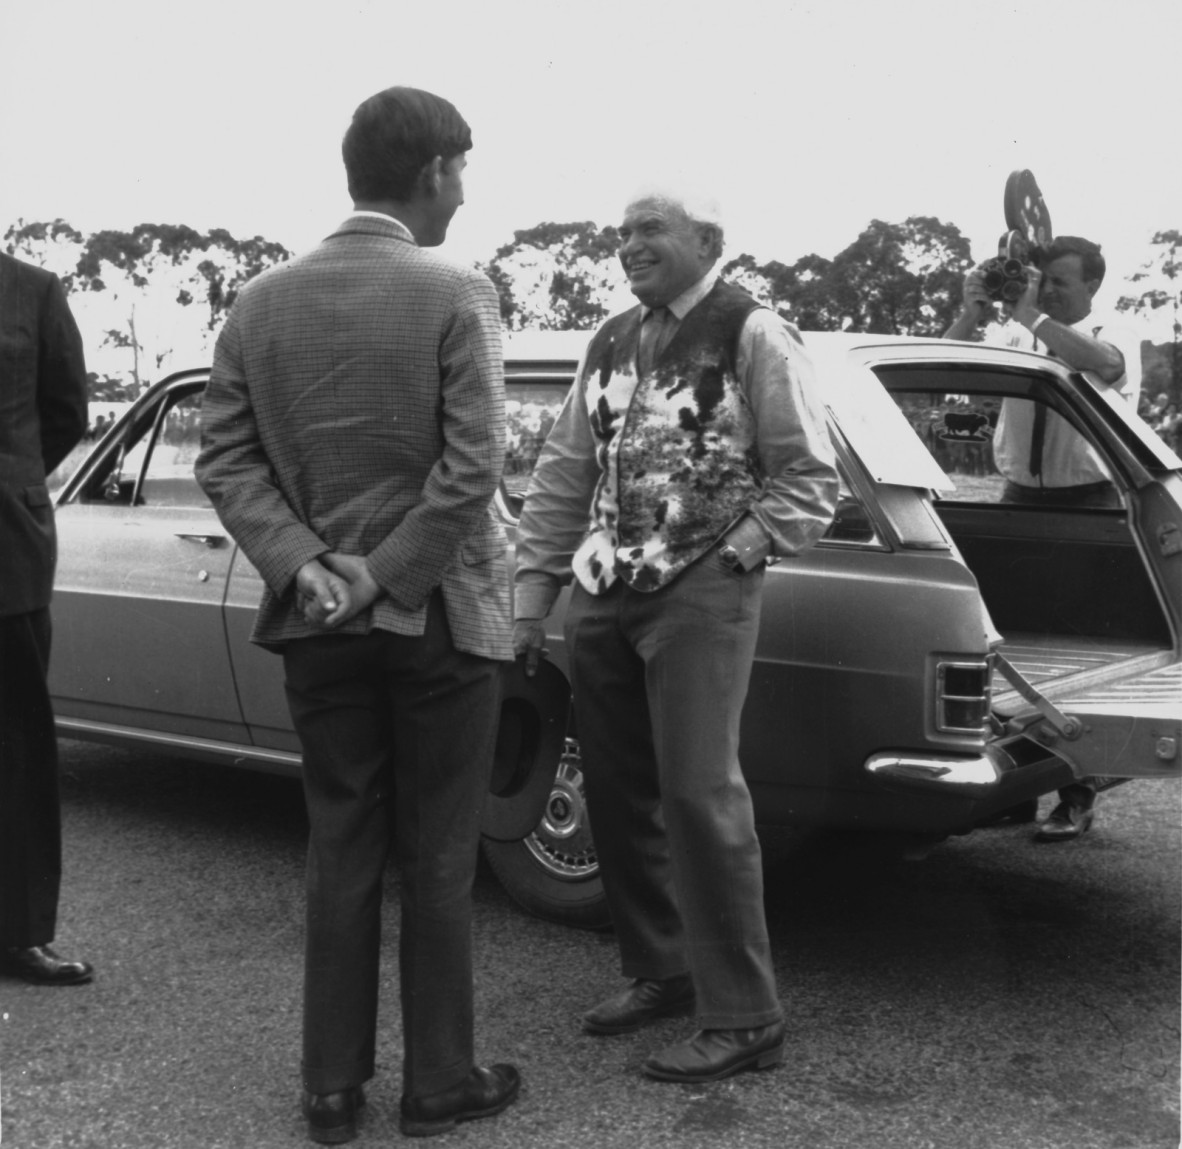 A black and white photograph of Prince Charles visits Eidsvold, May 1966